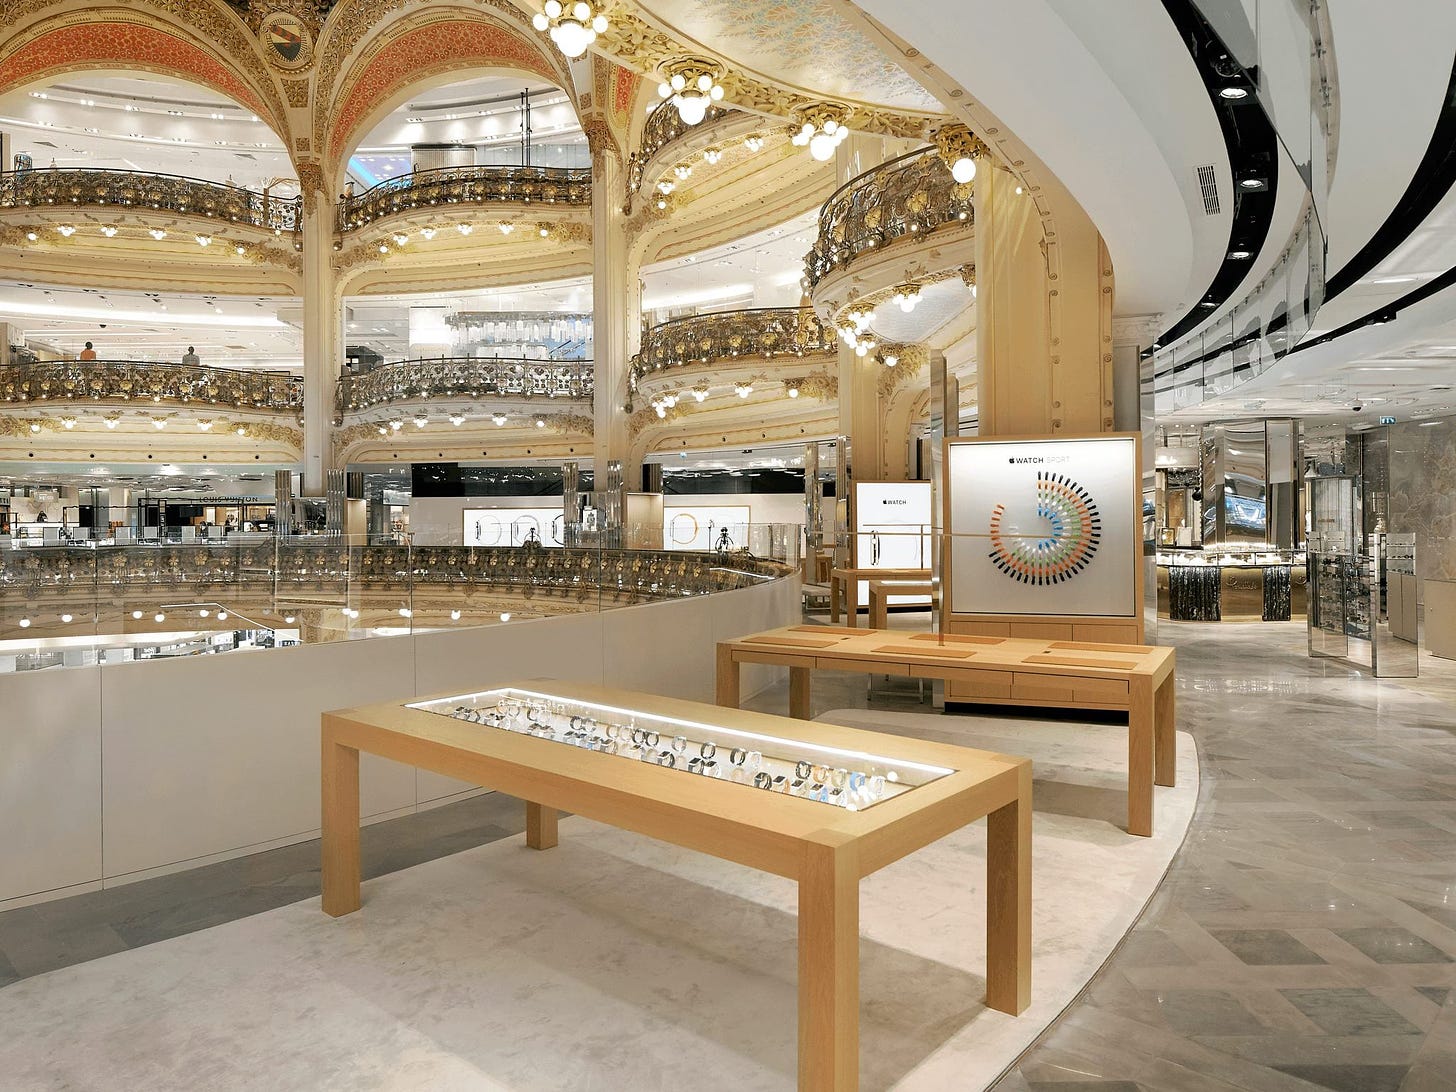 Apple Watch at Galeries Lafayette photographed before the department store opened. An Apple Watch display table is in the bottom center of the frame.